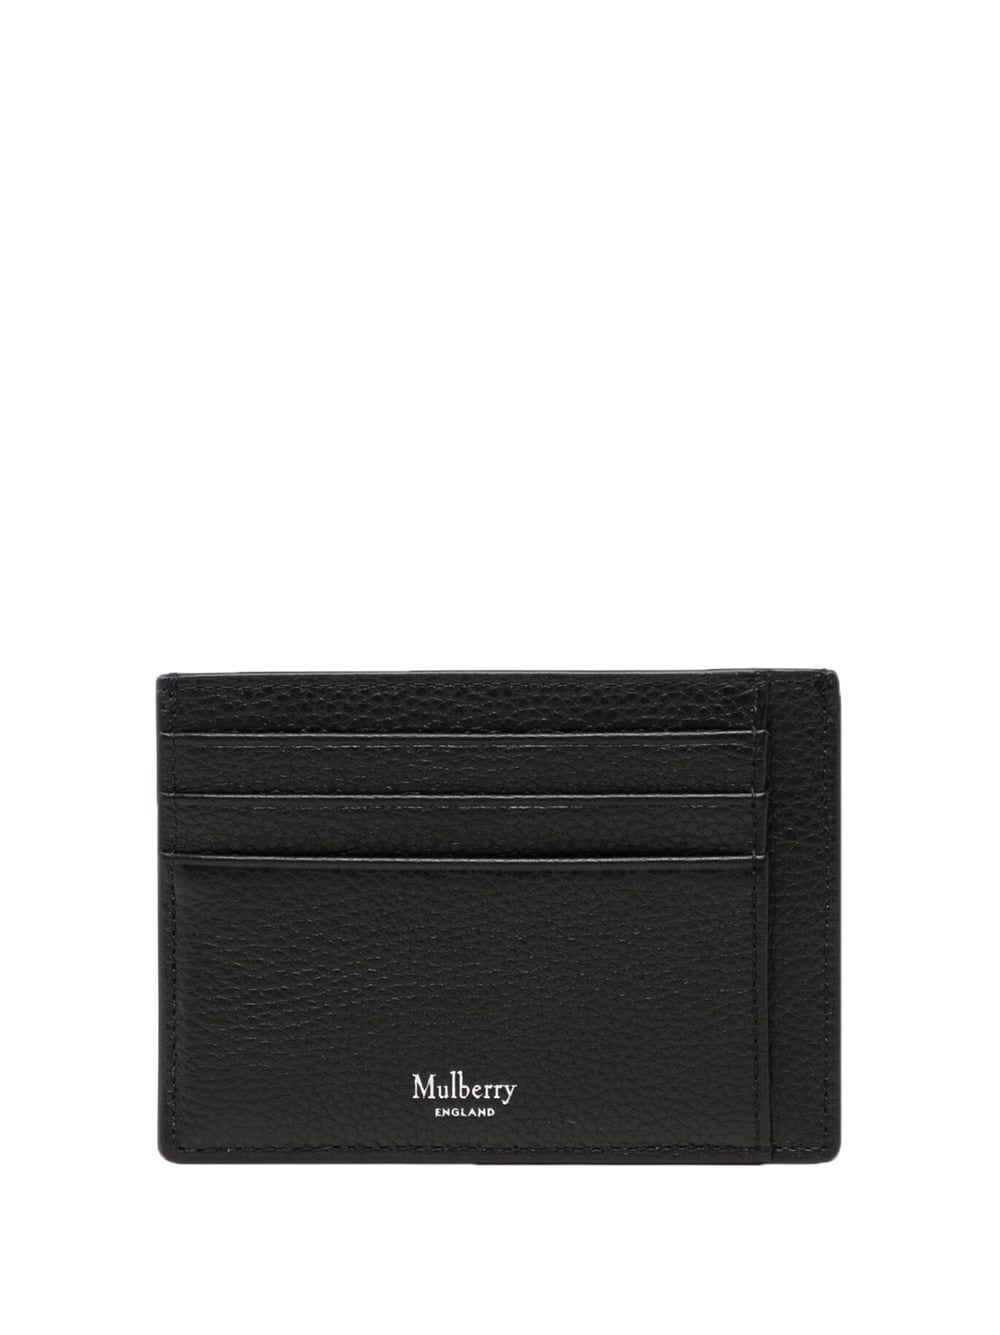 Mulberry small leather cardholder - Black von Mulberry